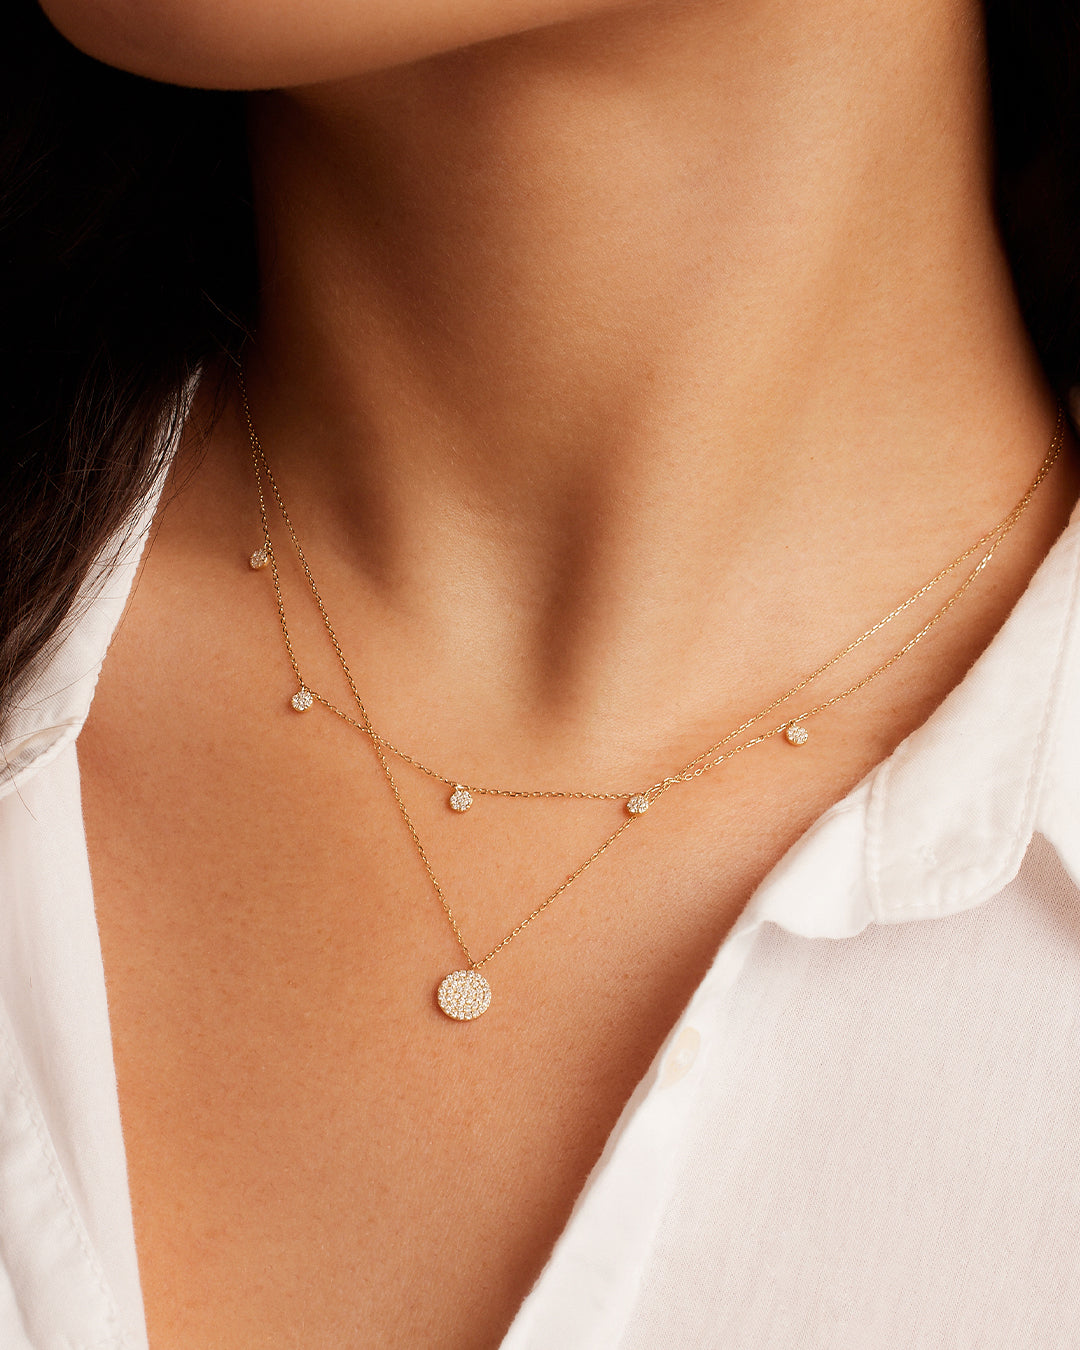 taudrey luxe: Worth it Necklace, 14k Gold, Pave Diamond Initial